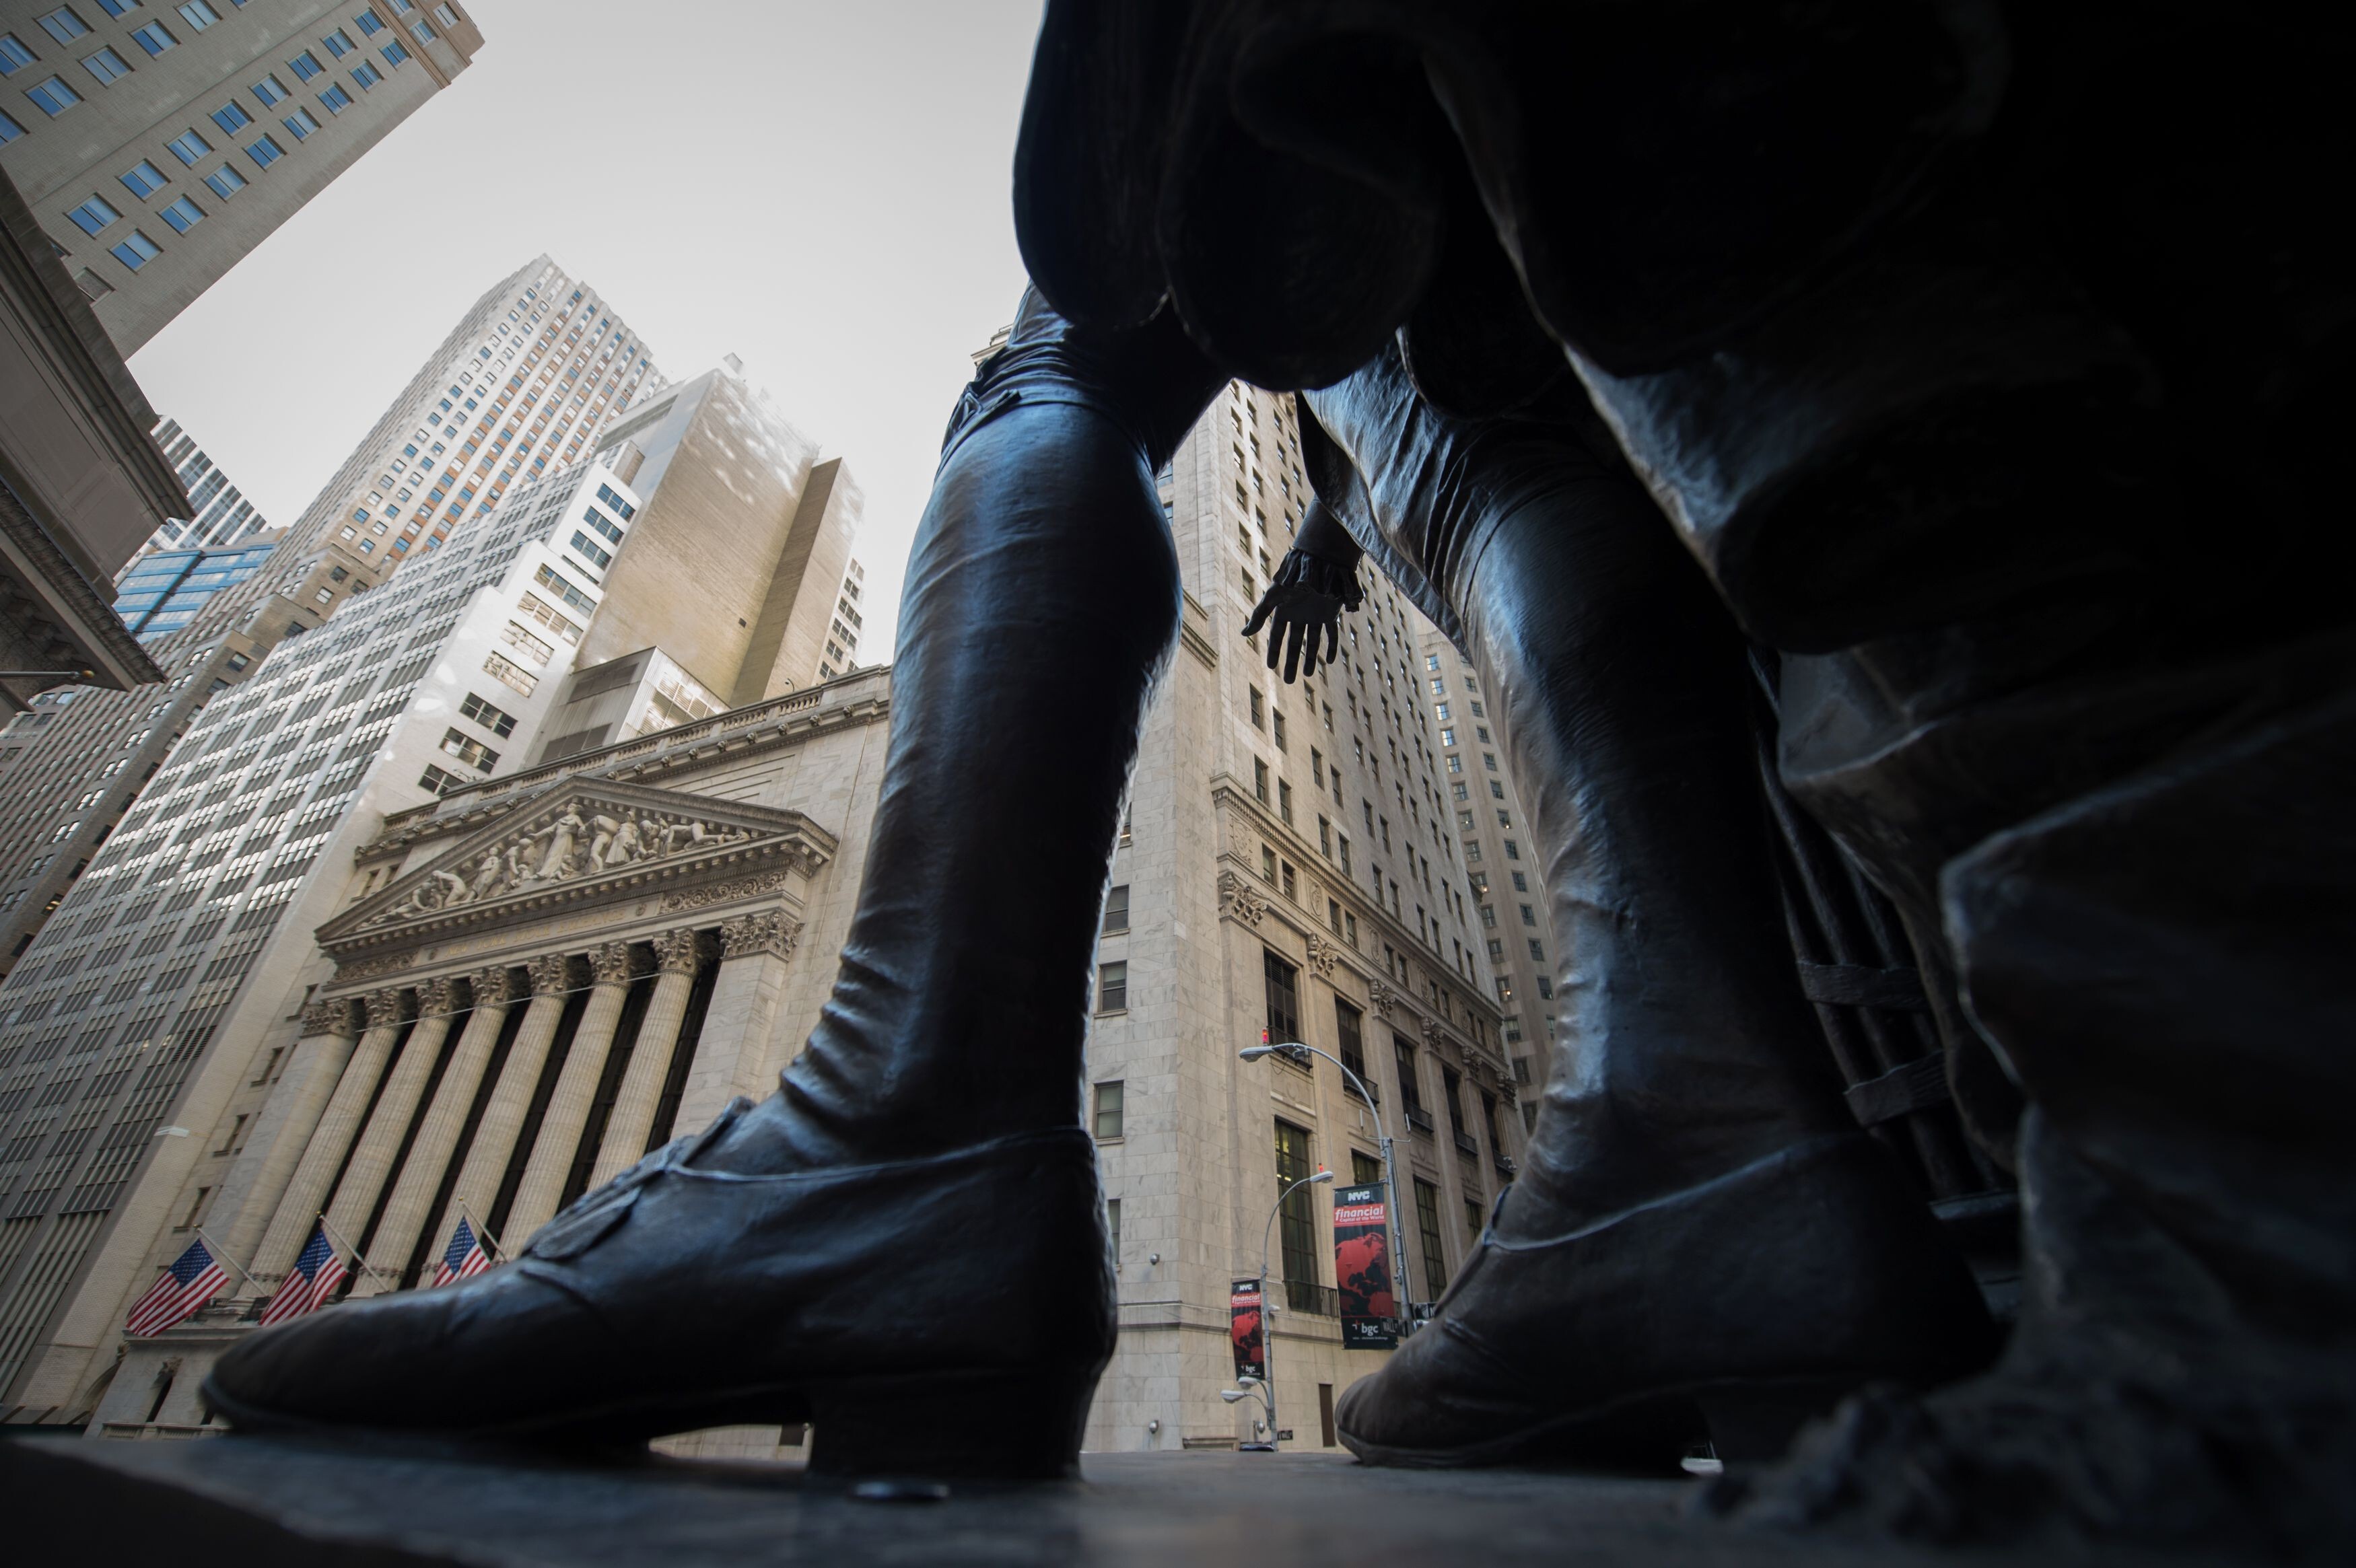 A statue of George Washington overlooks the New York Stock Exchange. In the worst-case scenario, should inflation surge and central banks stop mopping up bonds, stock markets could unravel. Photo: AFP